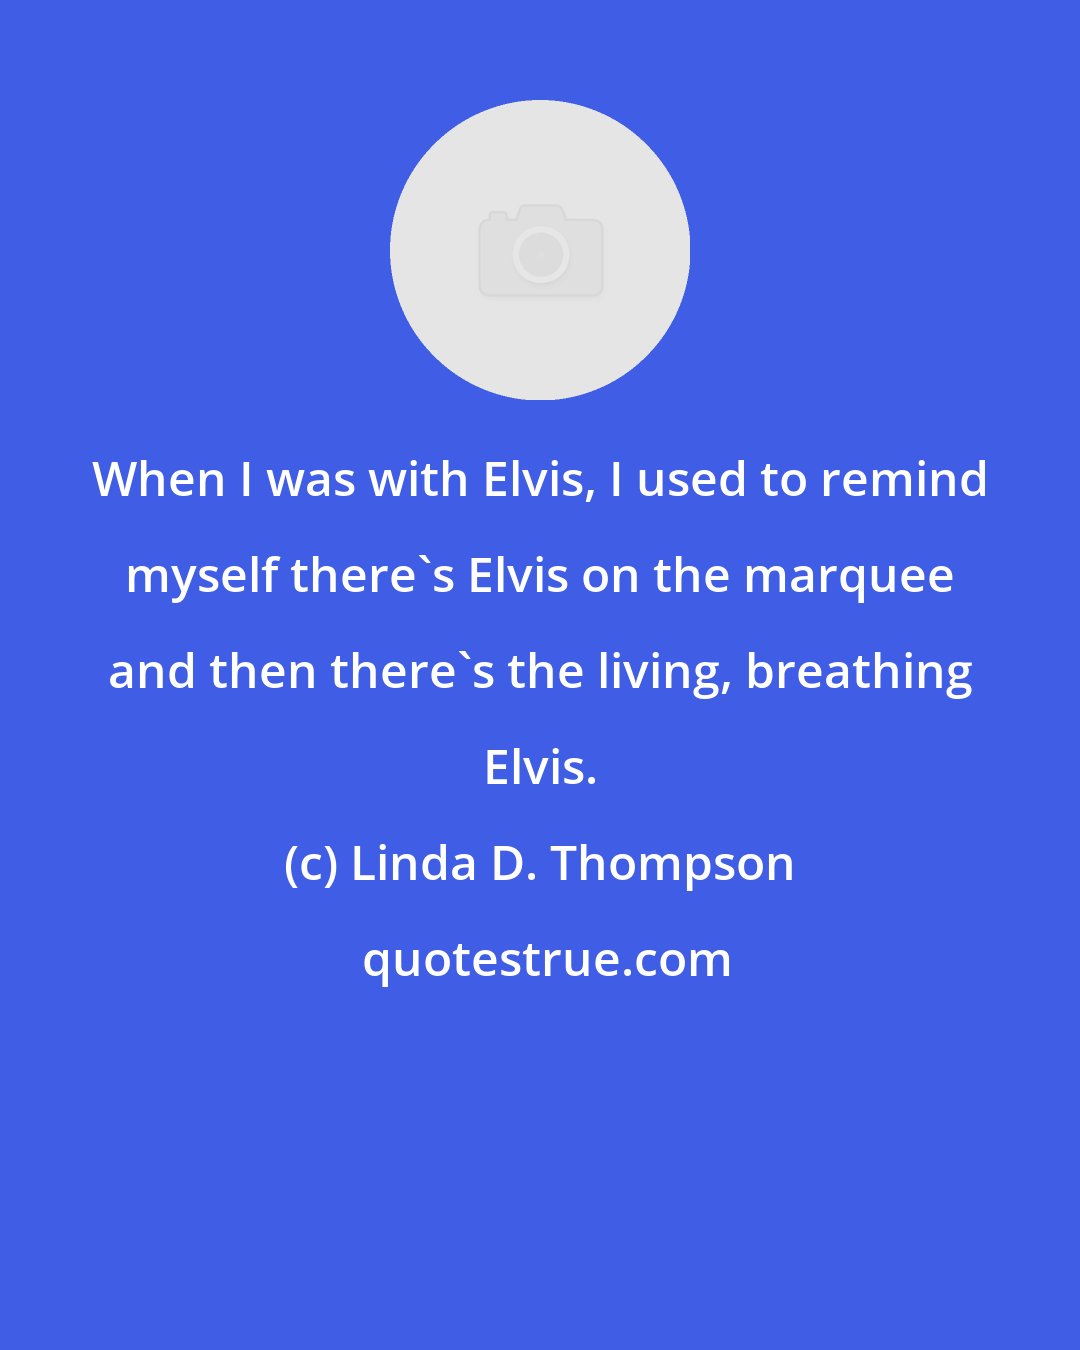 Linda D. Thompson: When I was with Elvis, I used to remind myself there's Elvis on the marquee and then there's the living, breathing Elvis.